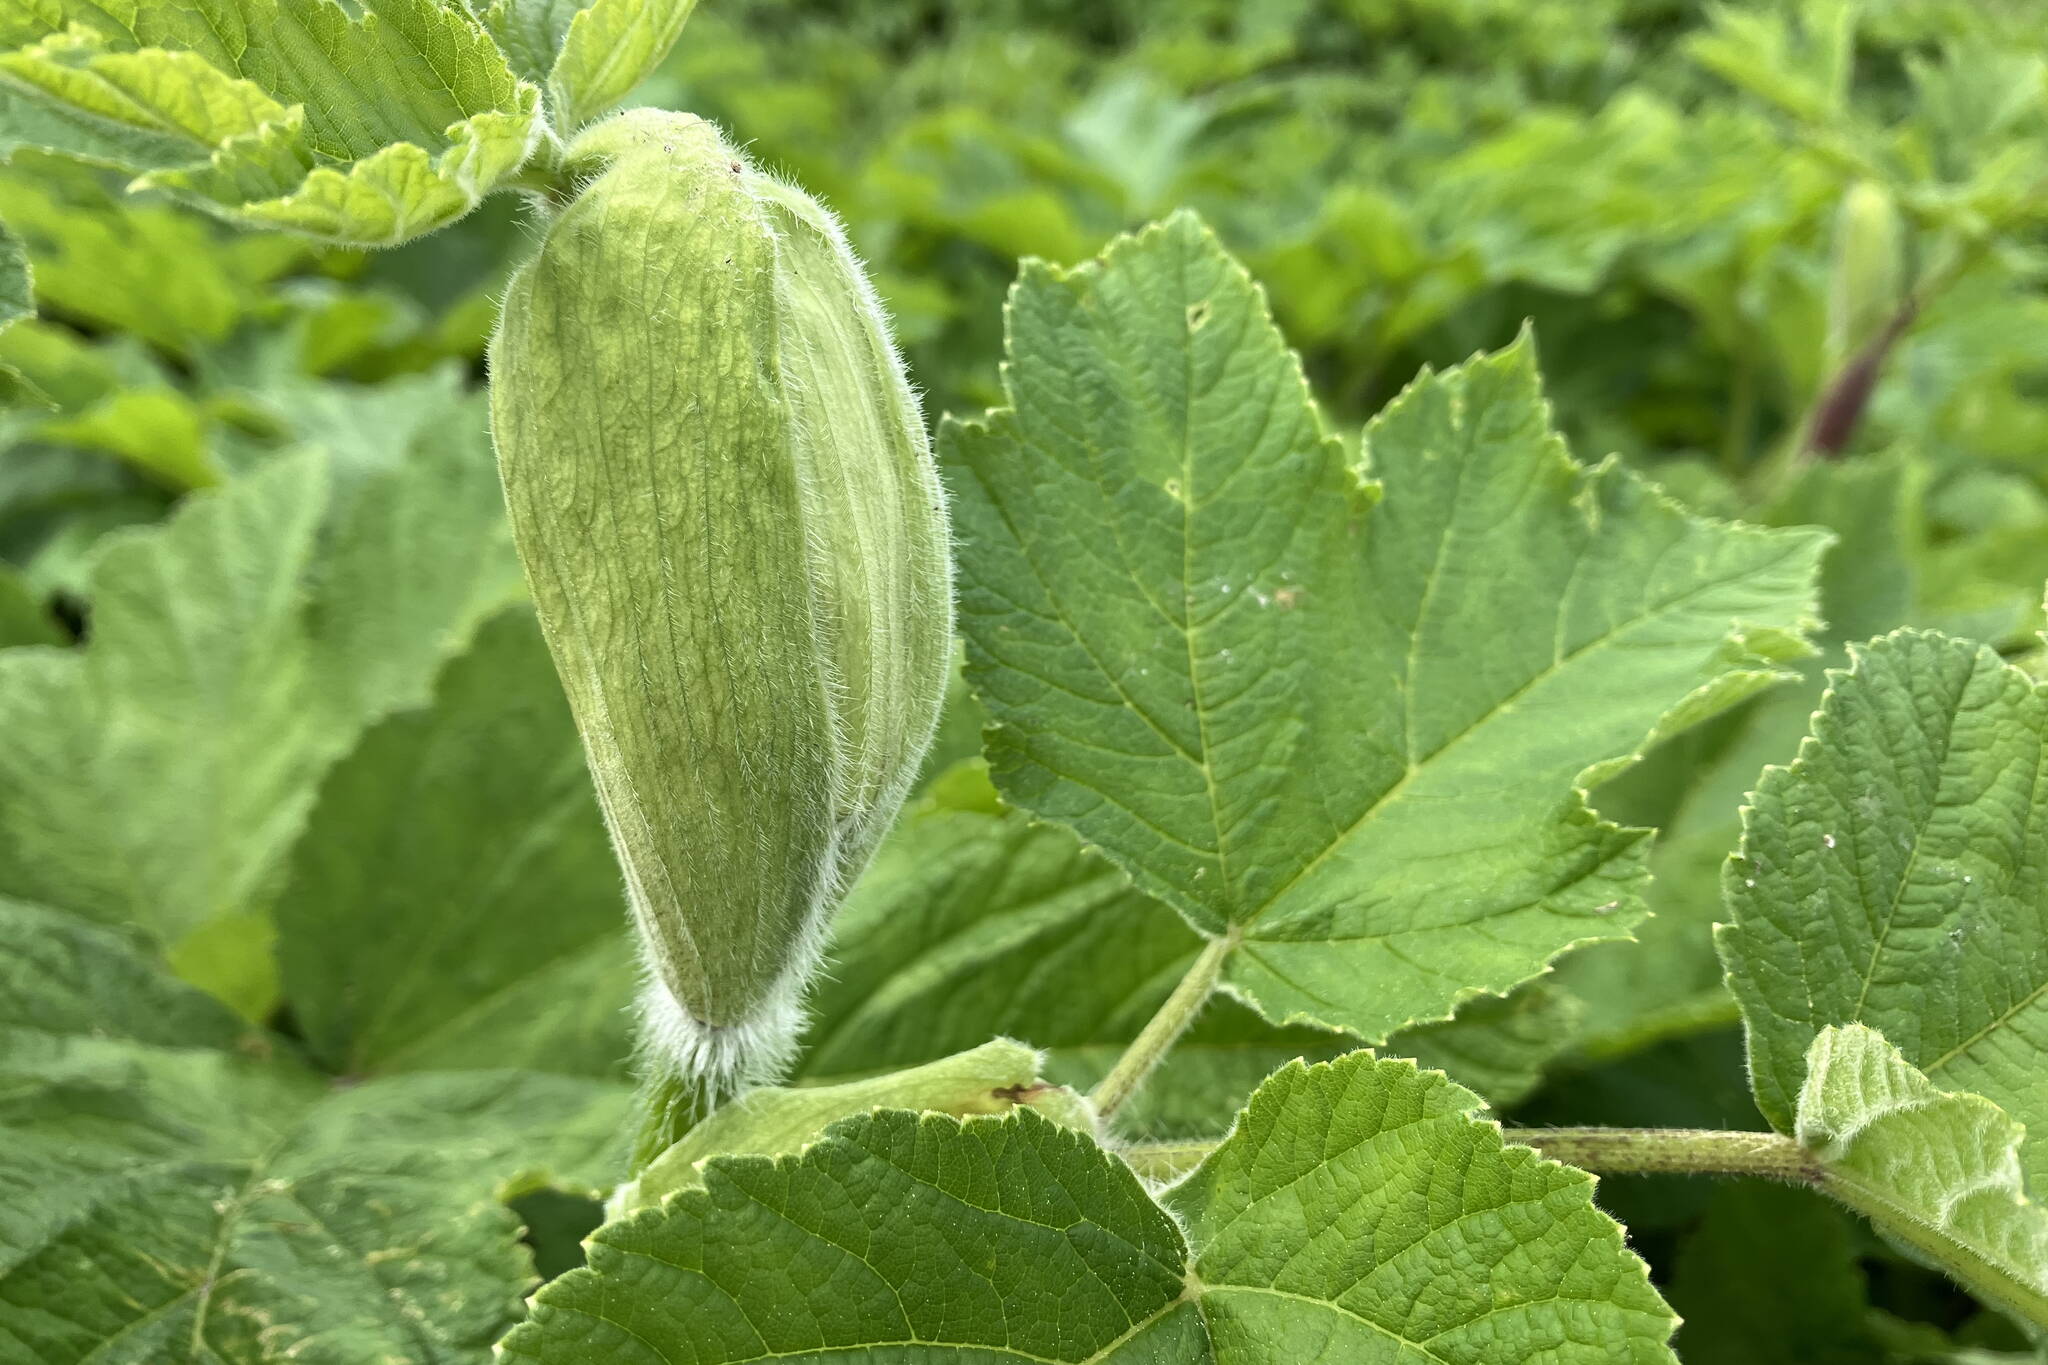 The inflorescences of cow parsnip are sheathed protectively, often with an attendant leaf that may emerge before the inflorescence, as shown here. (Photo by Mary F. Willson)